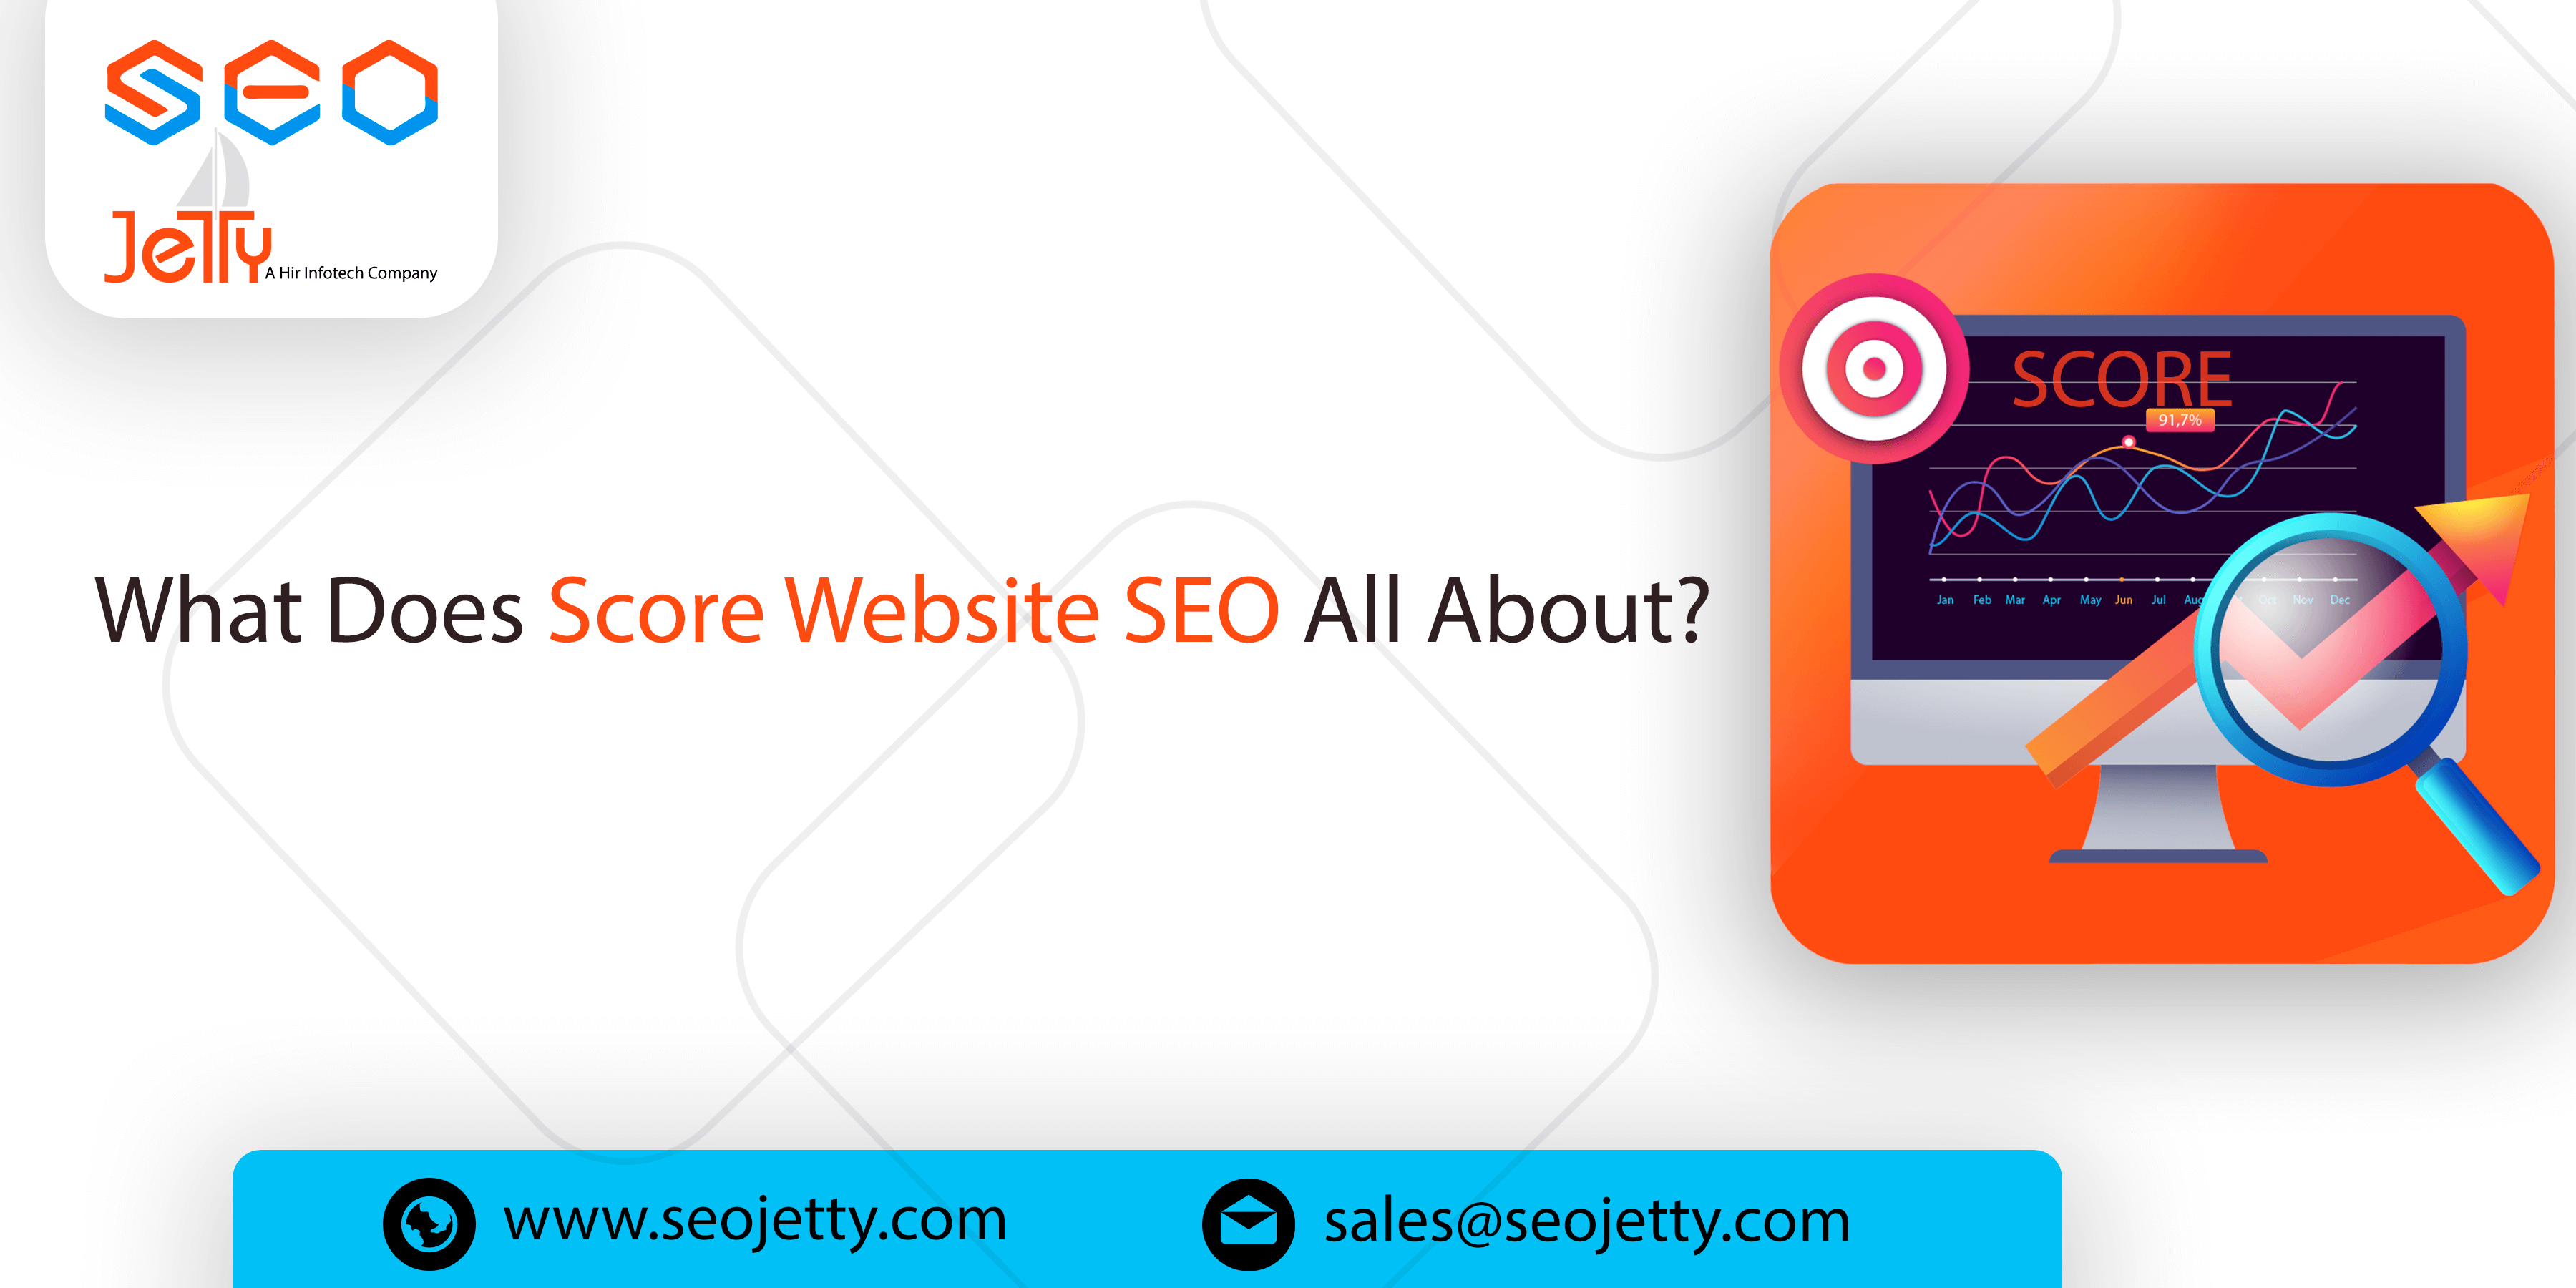 What Does Score Website SEO All About?